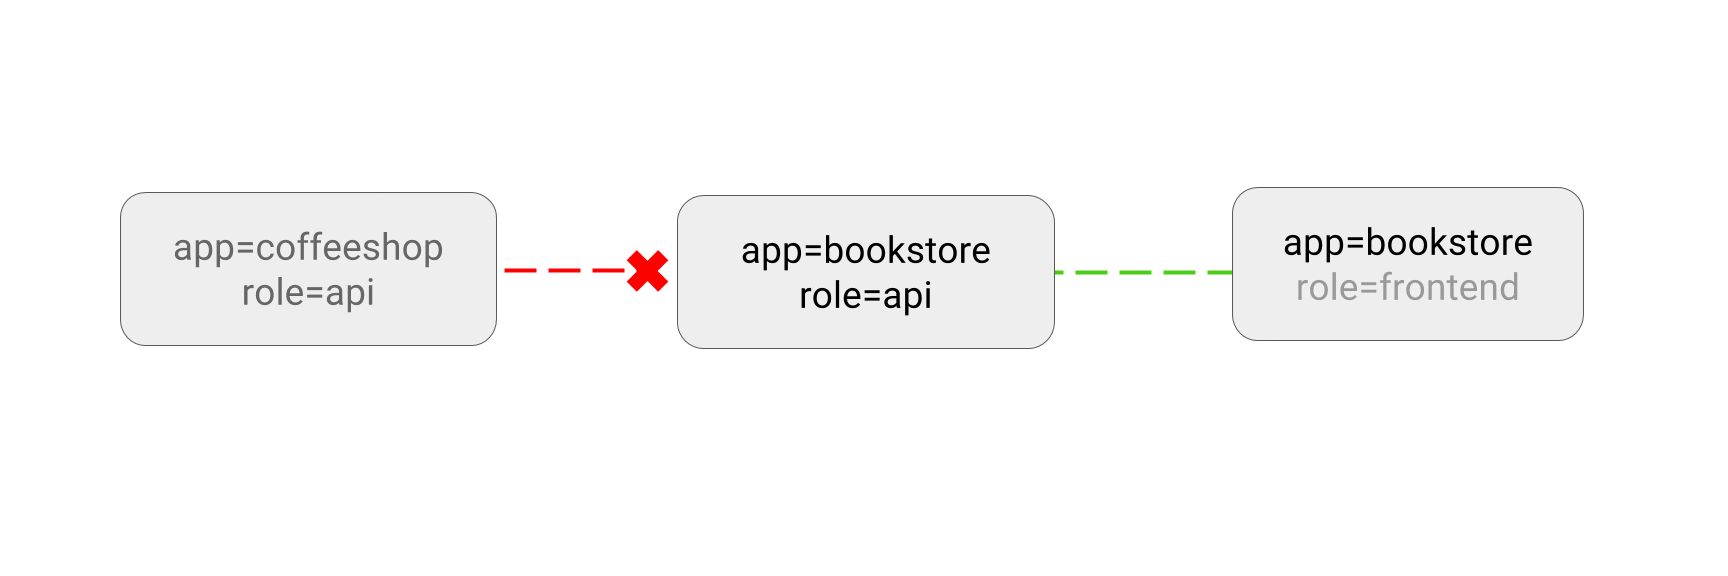 limit-to-an-app